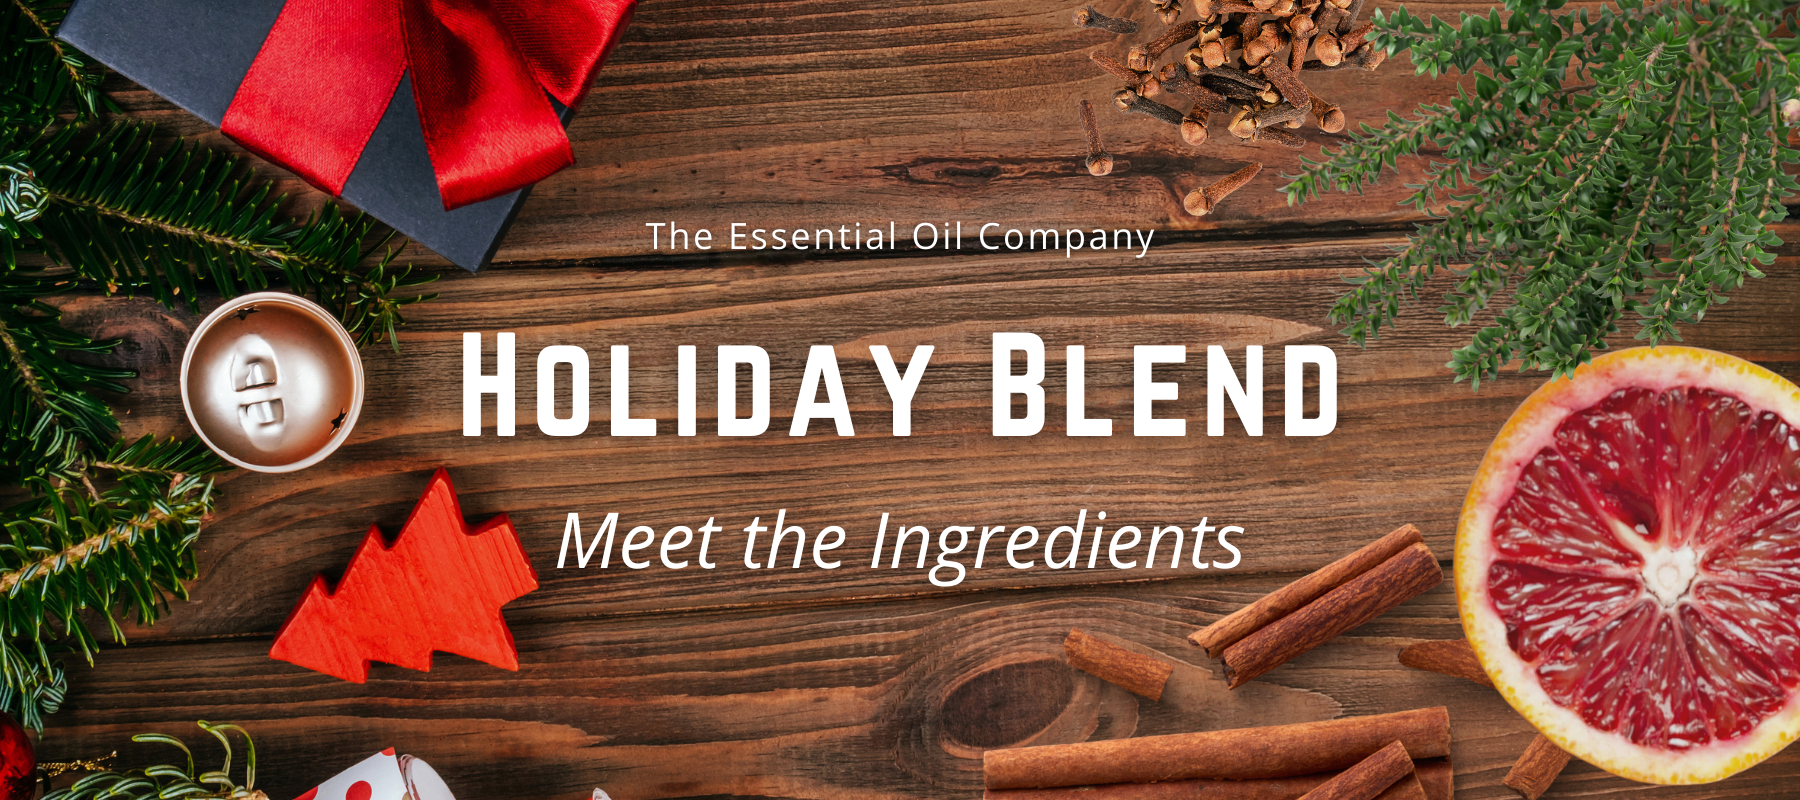 Holiday Blend: Meet the Ingredients